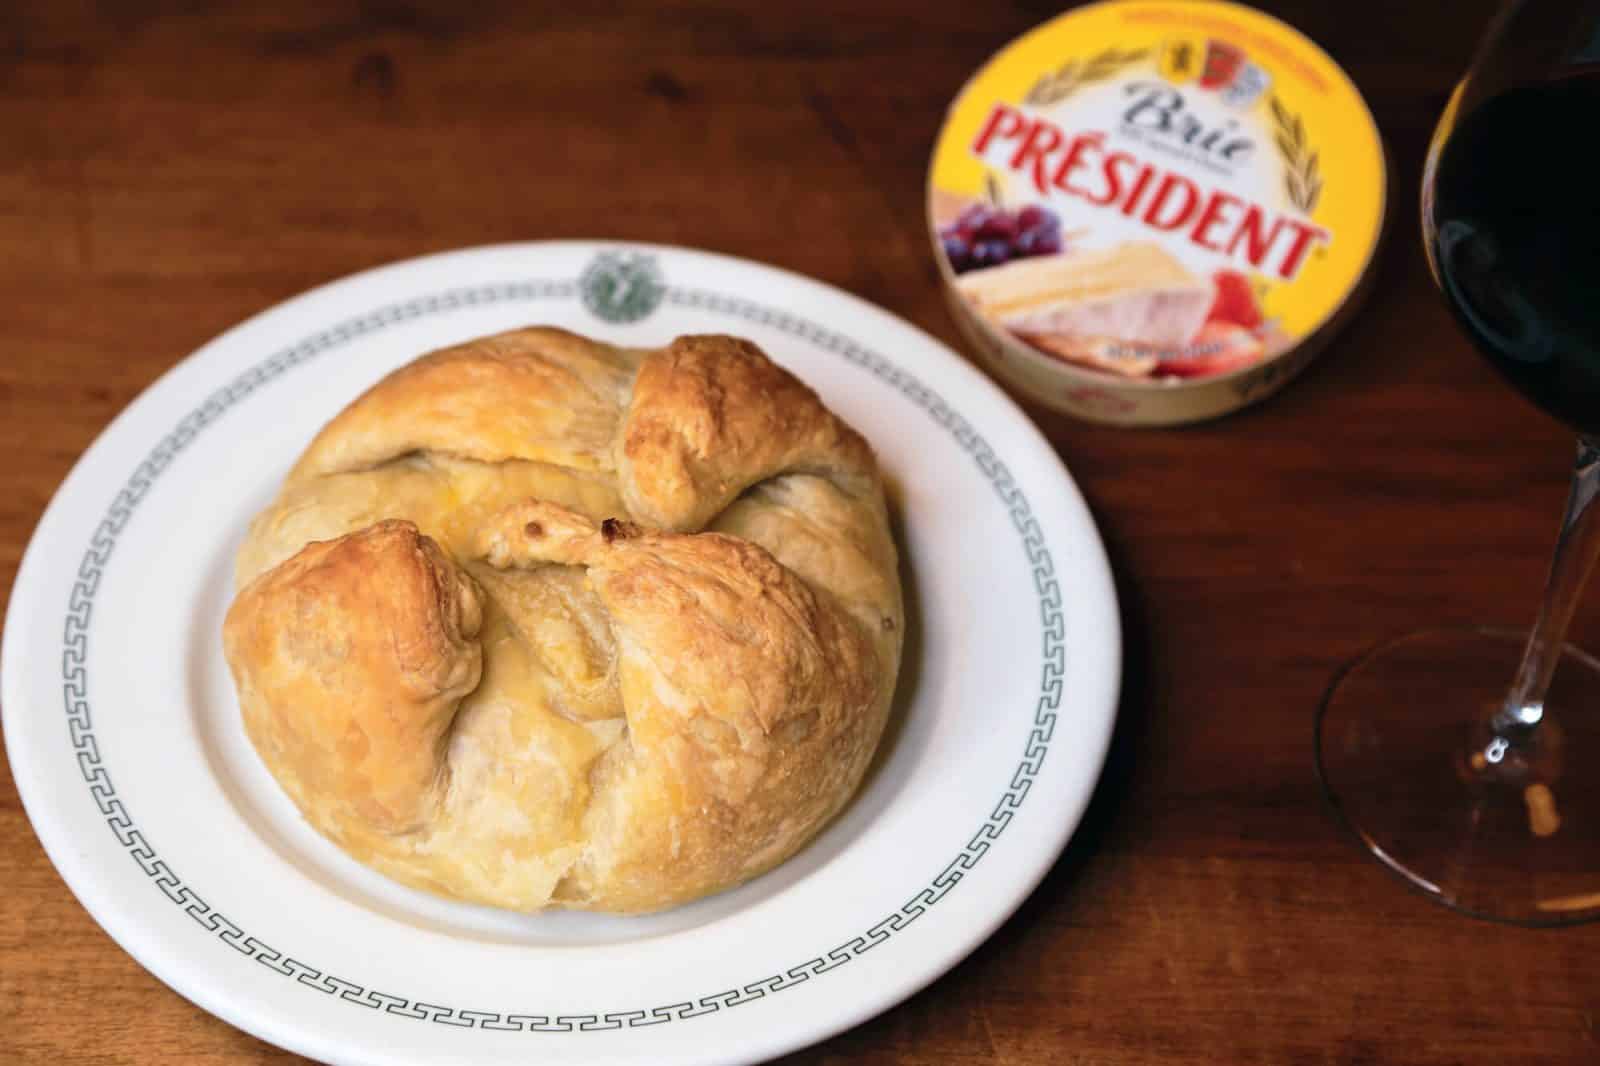 Baked Président Brie with Puff Pastry